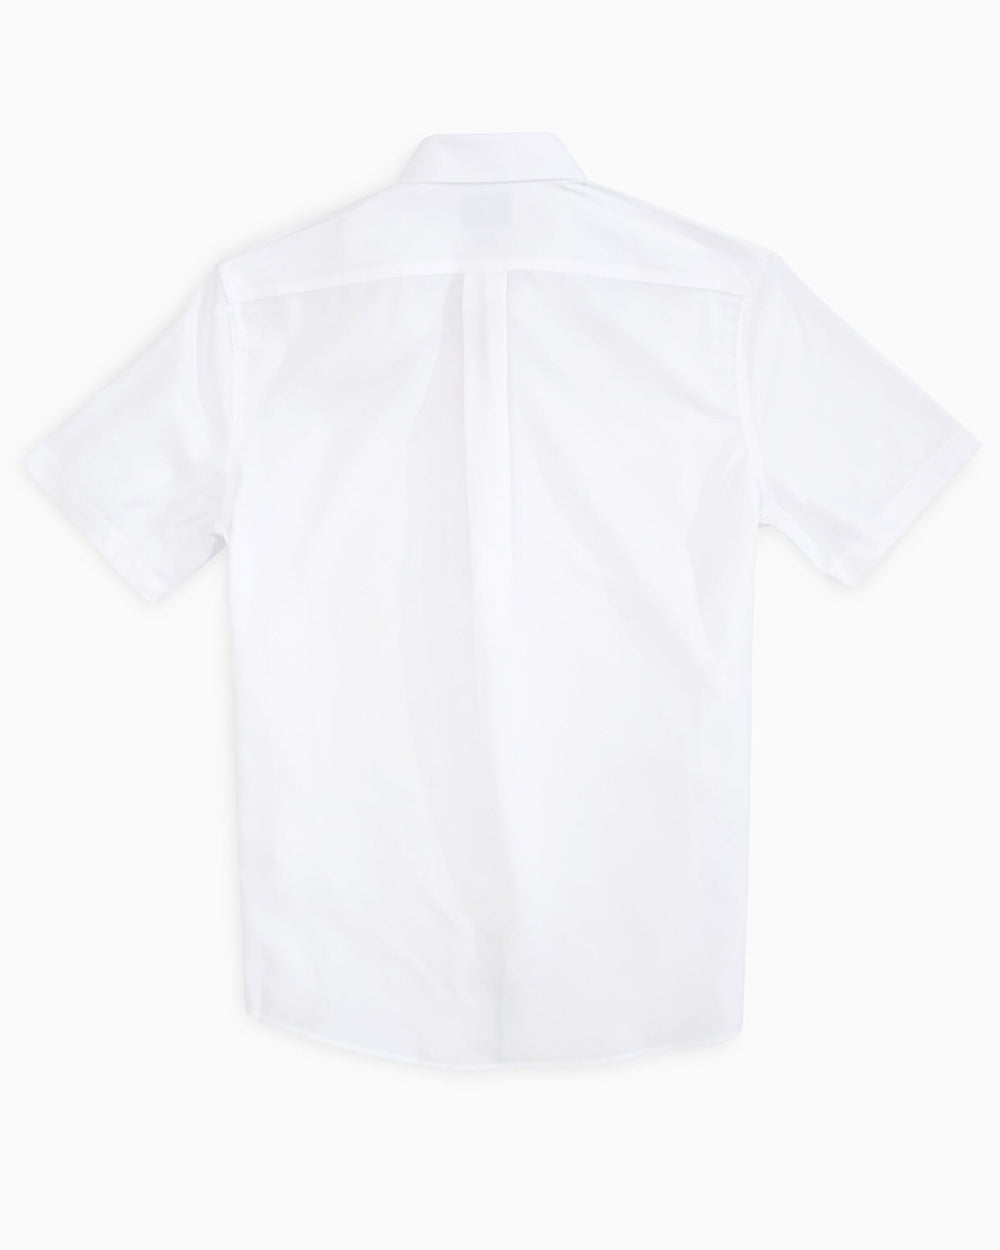 The back view of the Vanderbilt Commodores Short Sleeve Button Down Dock Shirt by Southern Tide - Classic White